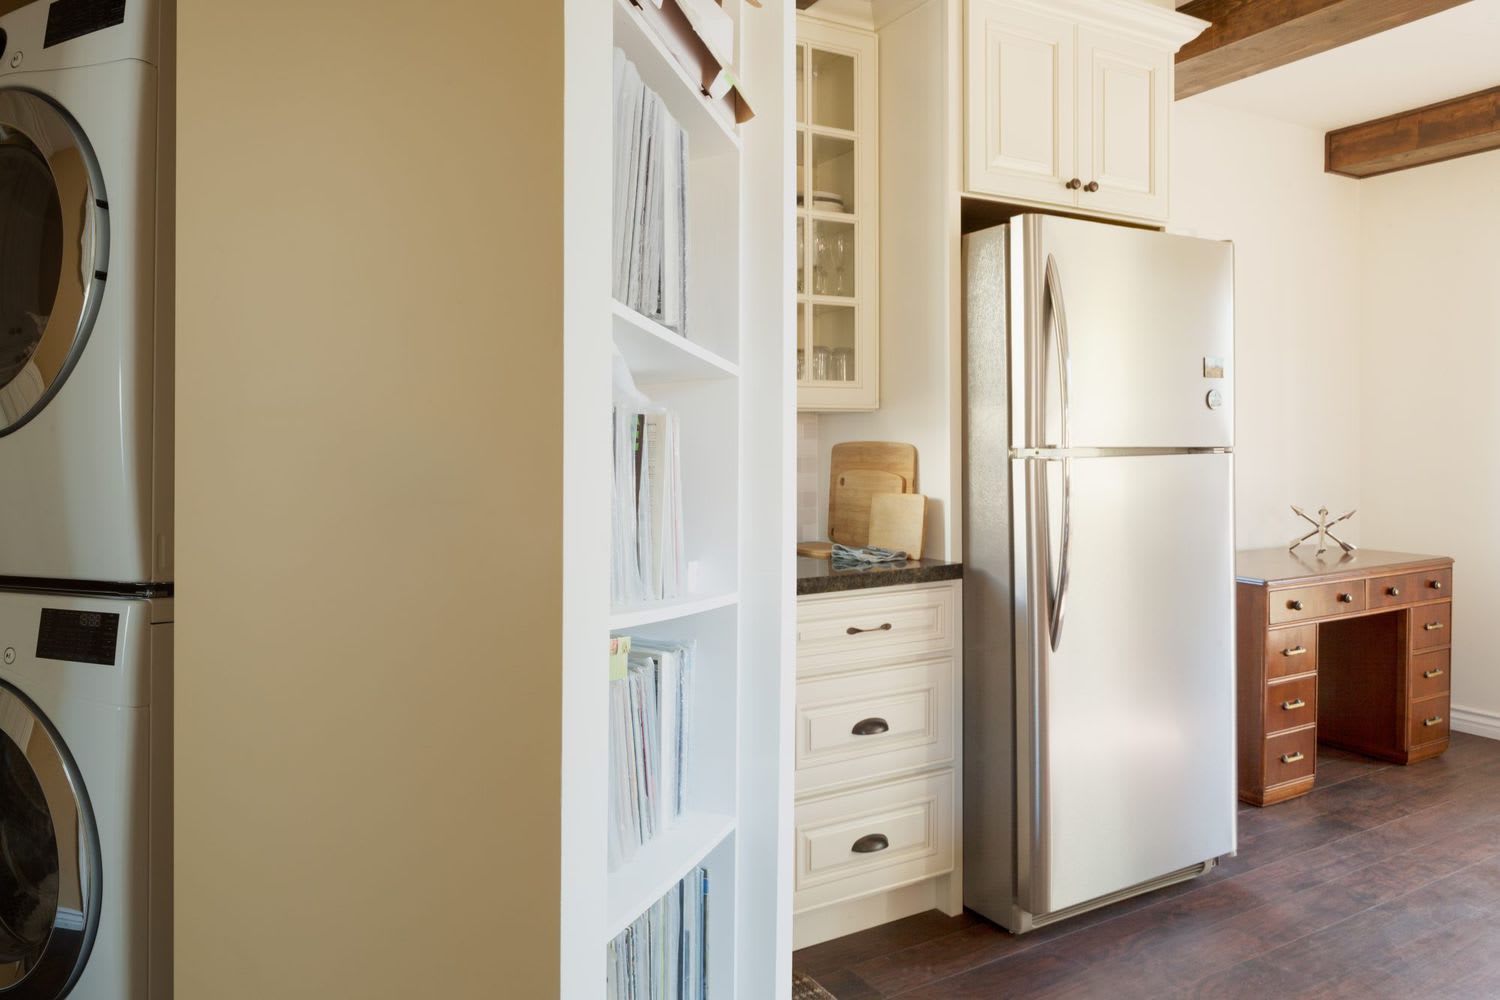 6 Ways to Turn the Side of Your Refrigerator Into Storage Space